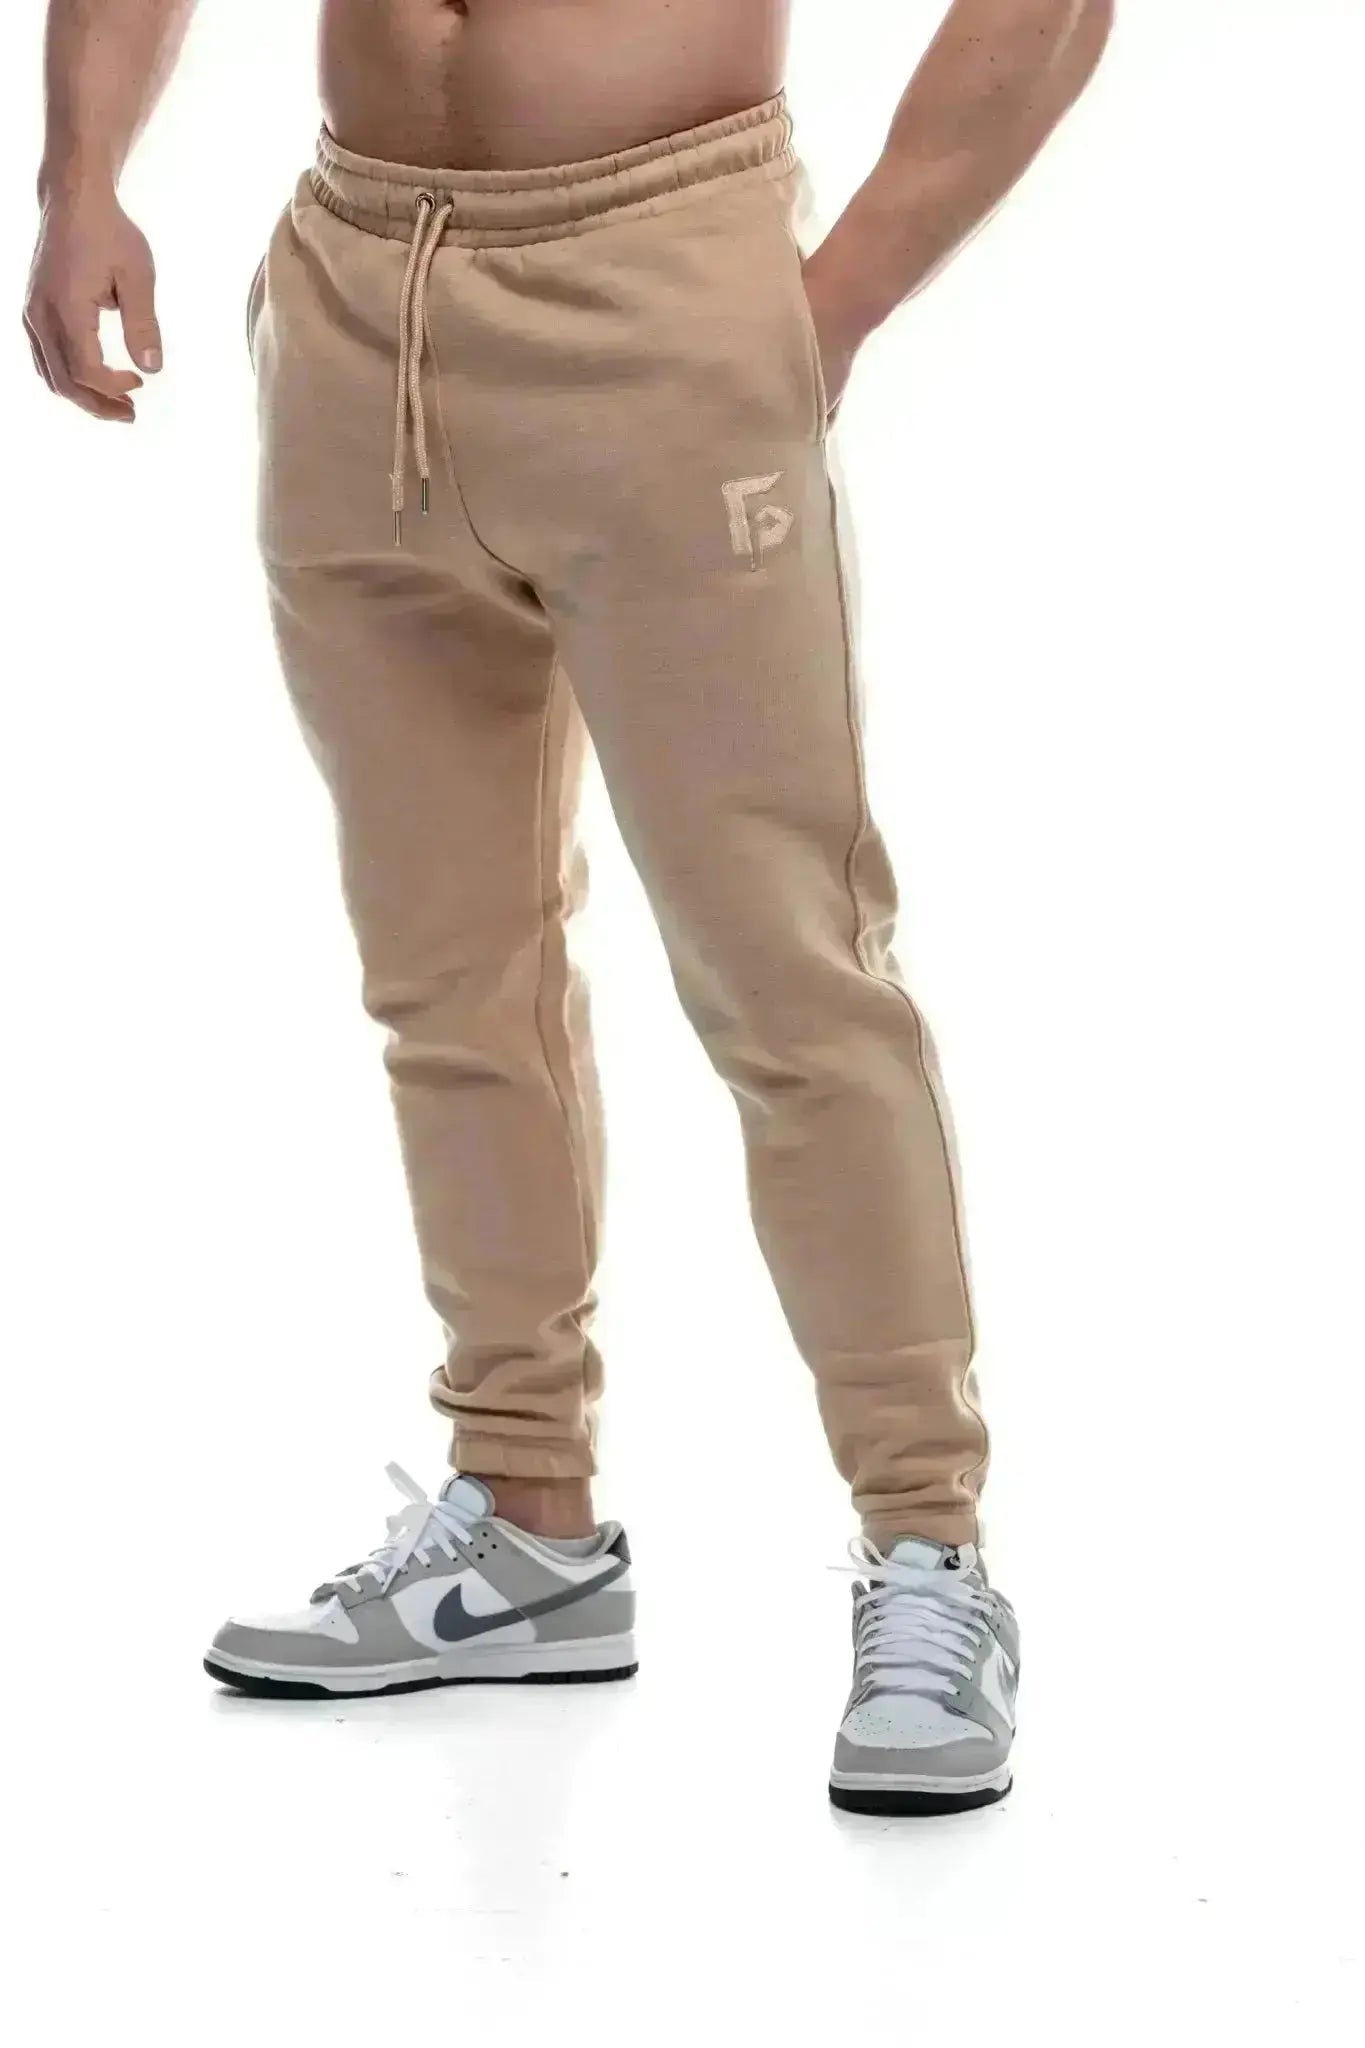 Clearance - Motion Joggers - Gunsmith Fitness